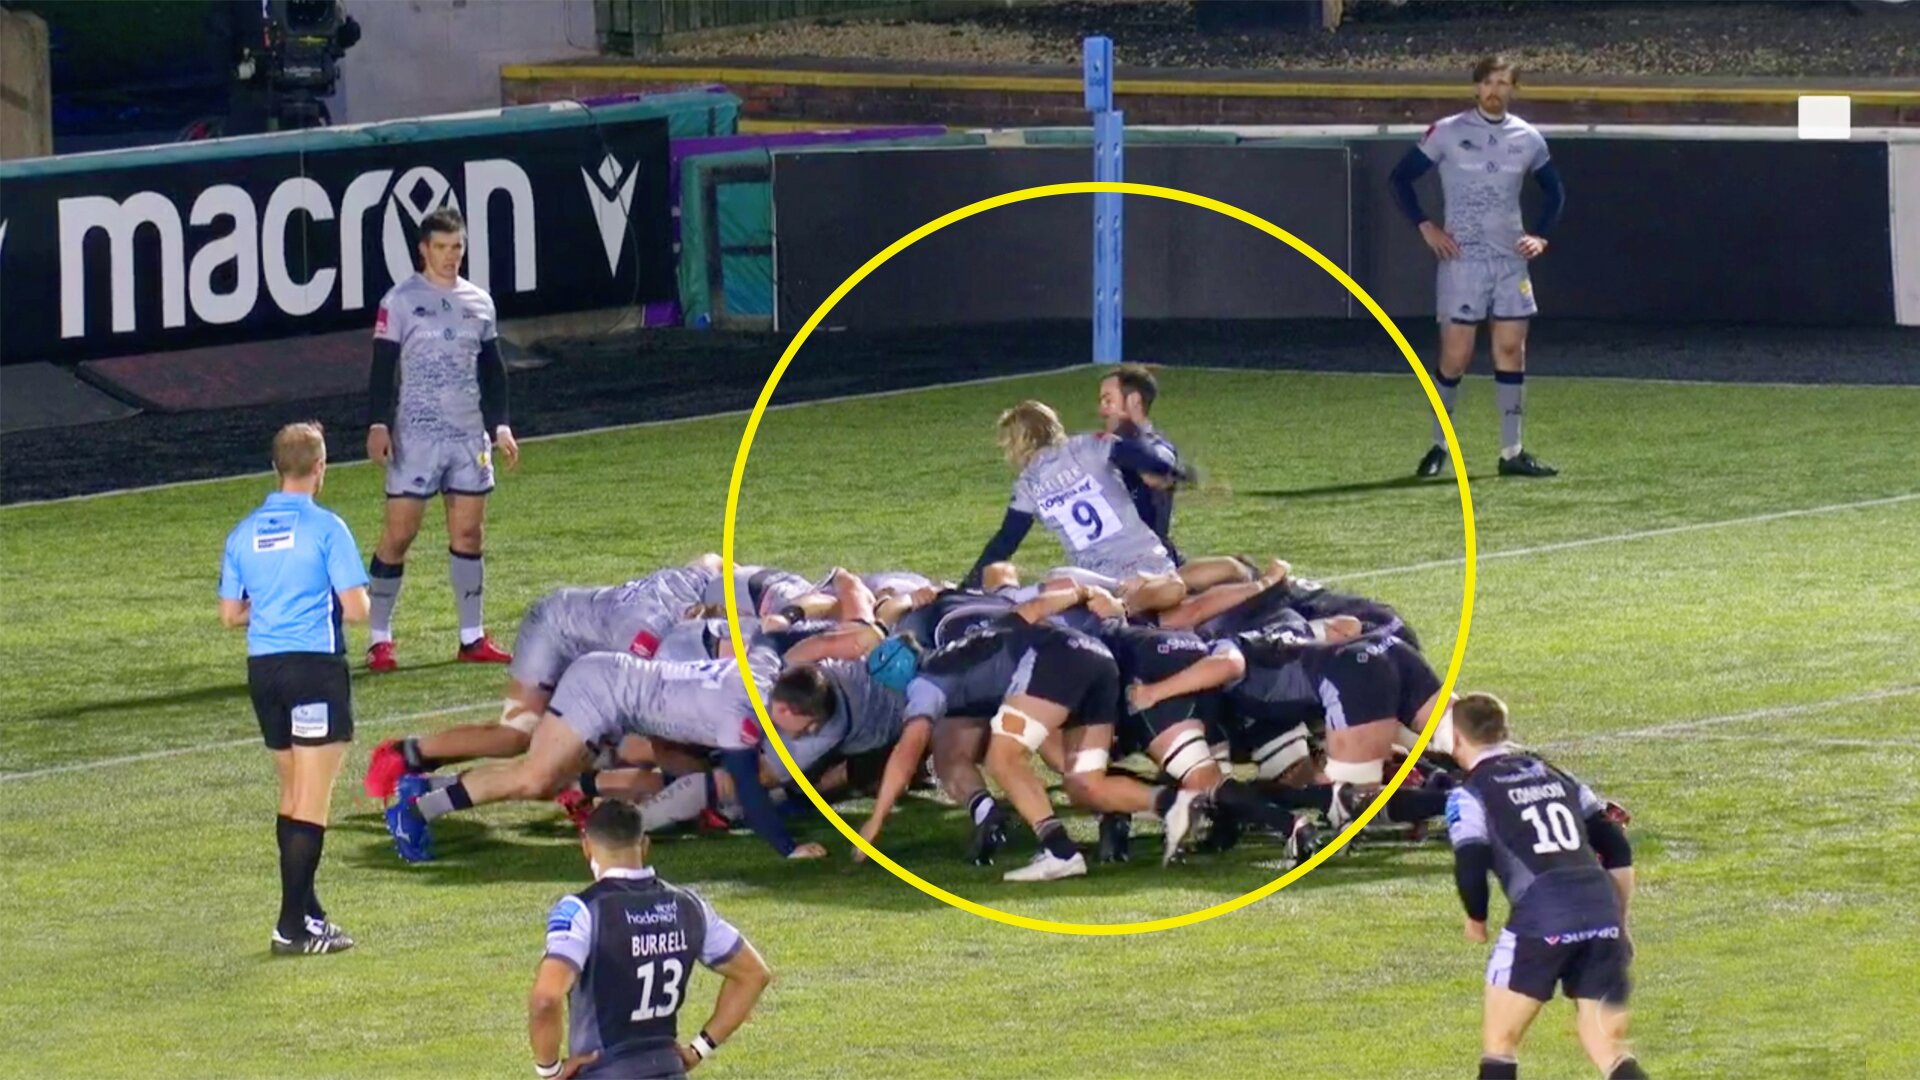 Faf de Klerk is riled up by angry northerner as brawl breaks out in fiery Gallagher Premiership clash